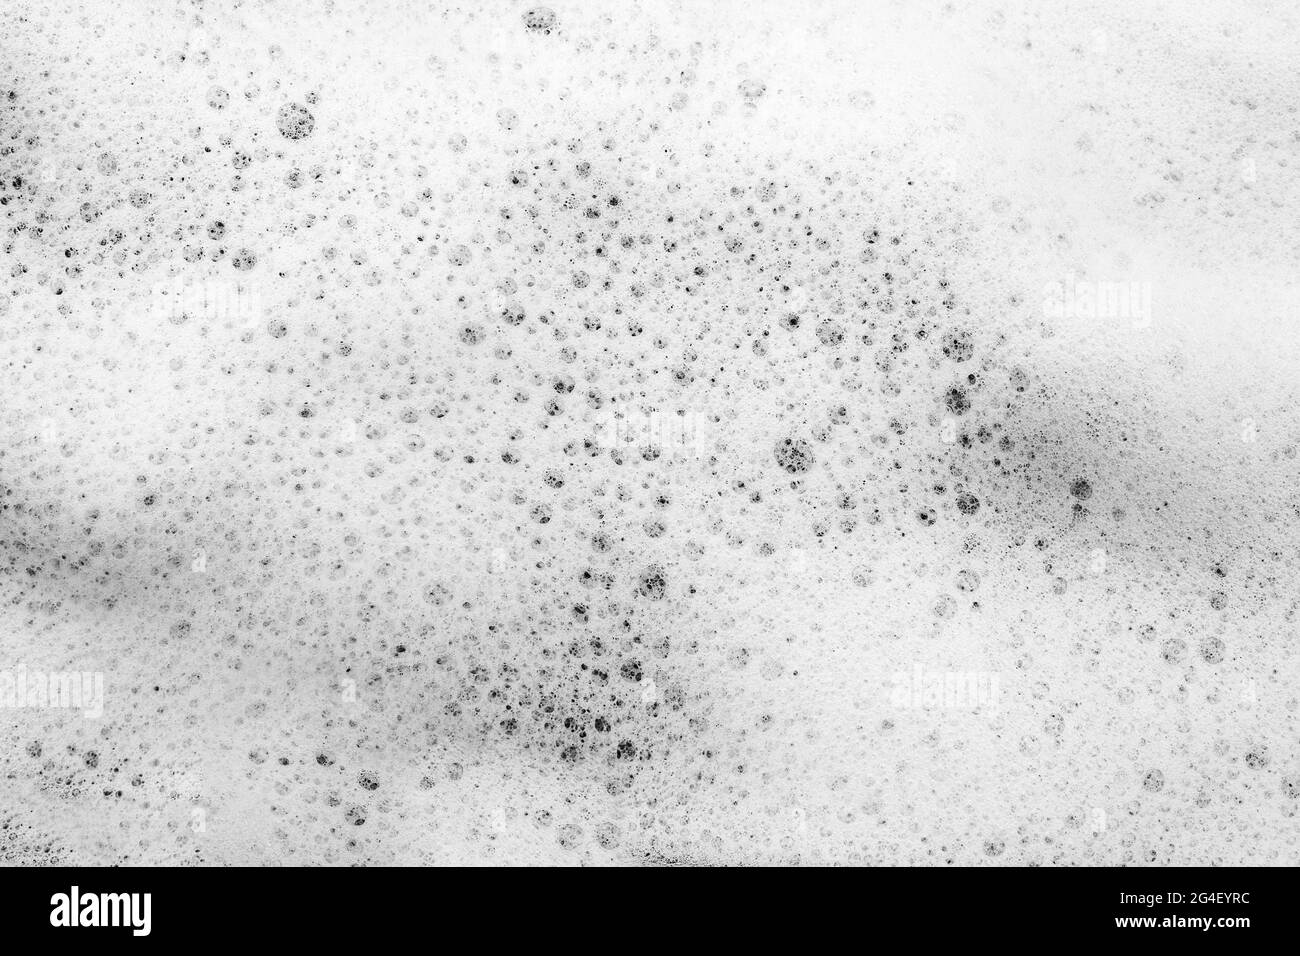 White foam background, soap froth bubbles texture, lather surface, detergent, laundry spume, hygiene soap sud, cosmetic cleanser, foamy bathtub, sea Stock Photo